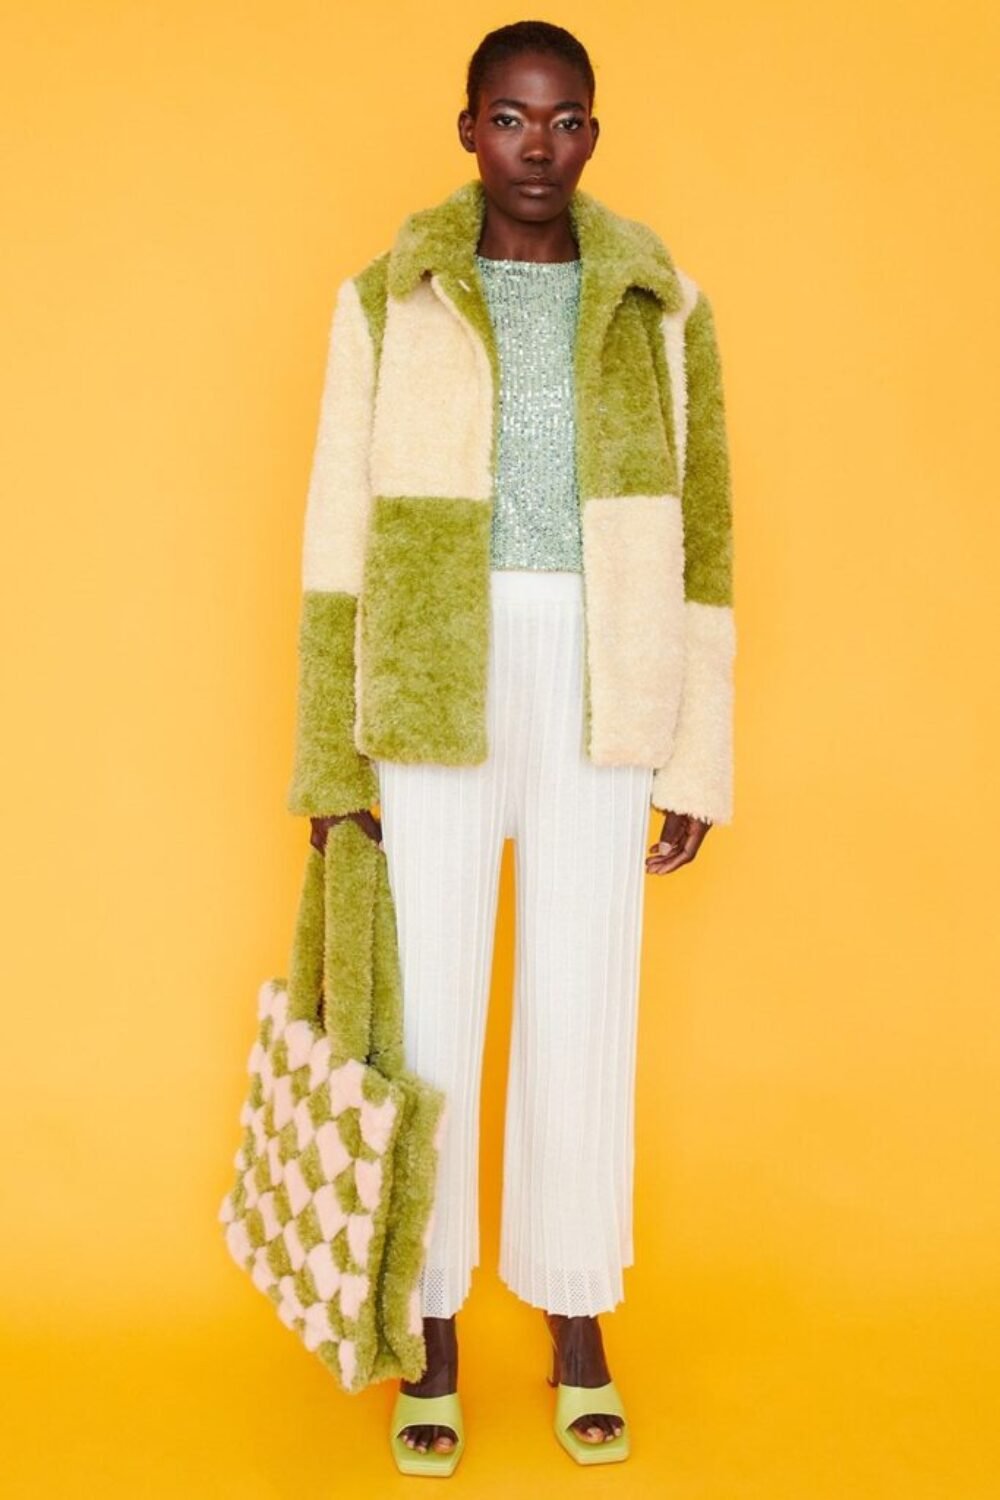 Shop Lux Green and Cream Faux Shearling Checkered Oversized Coat and women's luxury and designer clothes at www.lux-apparel.co.uk